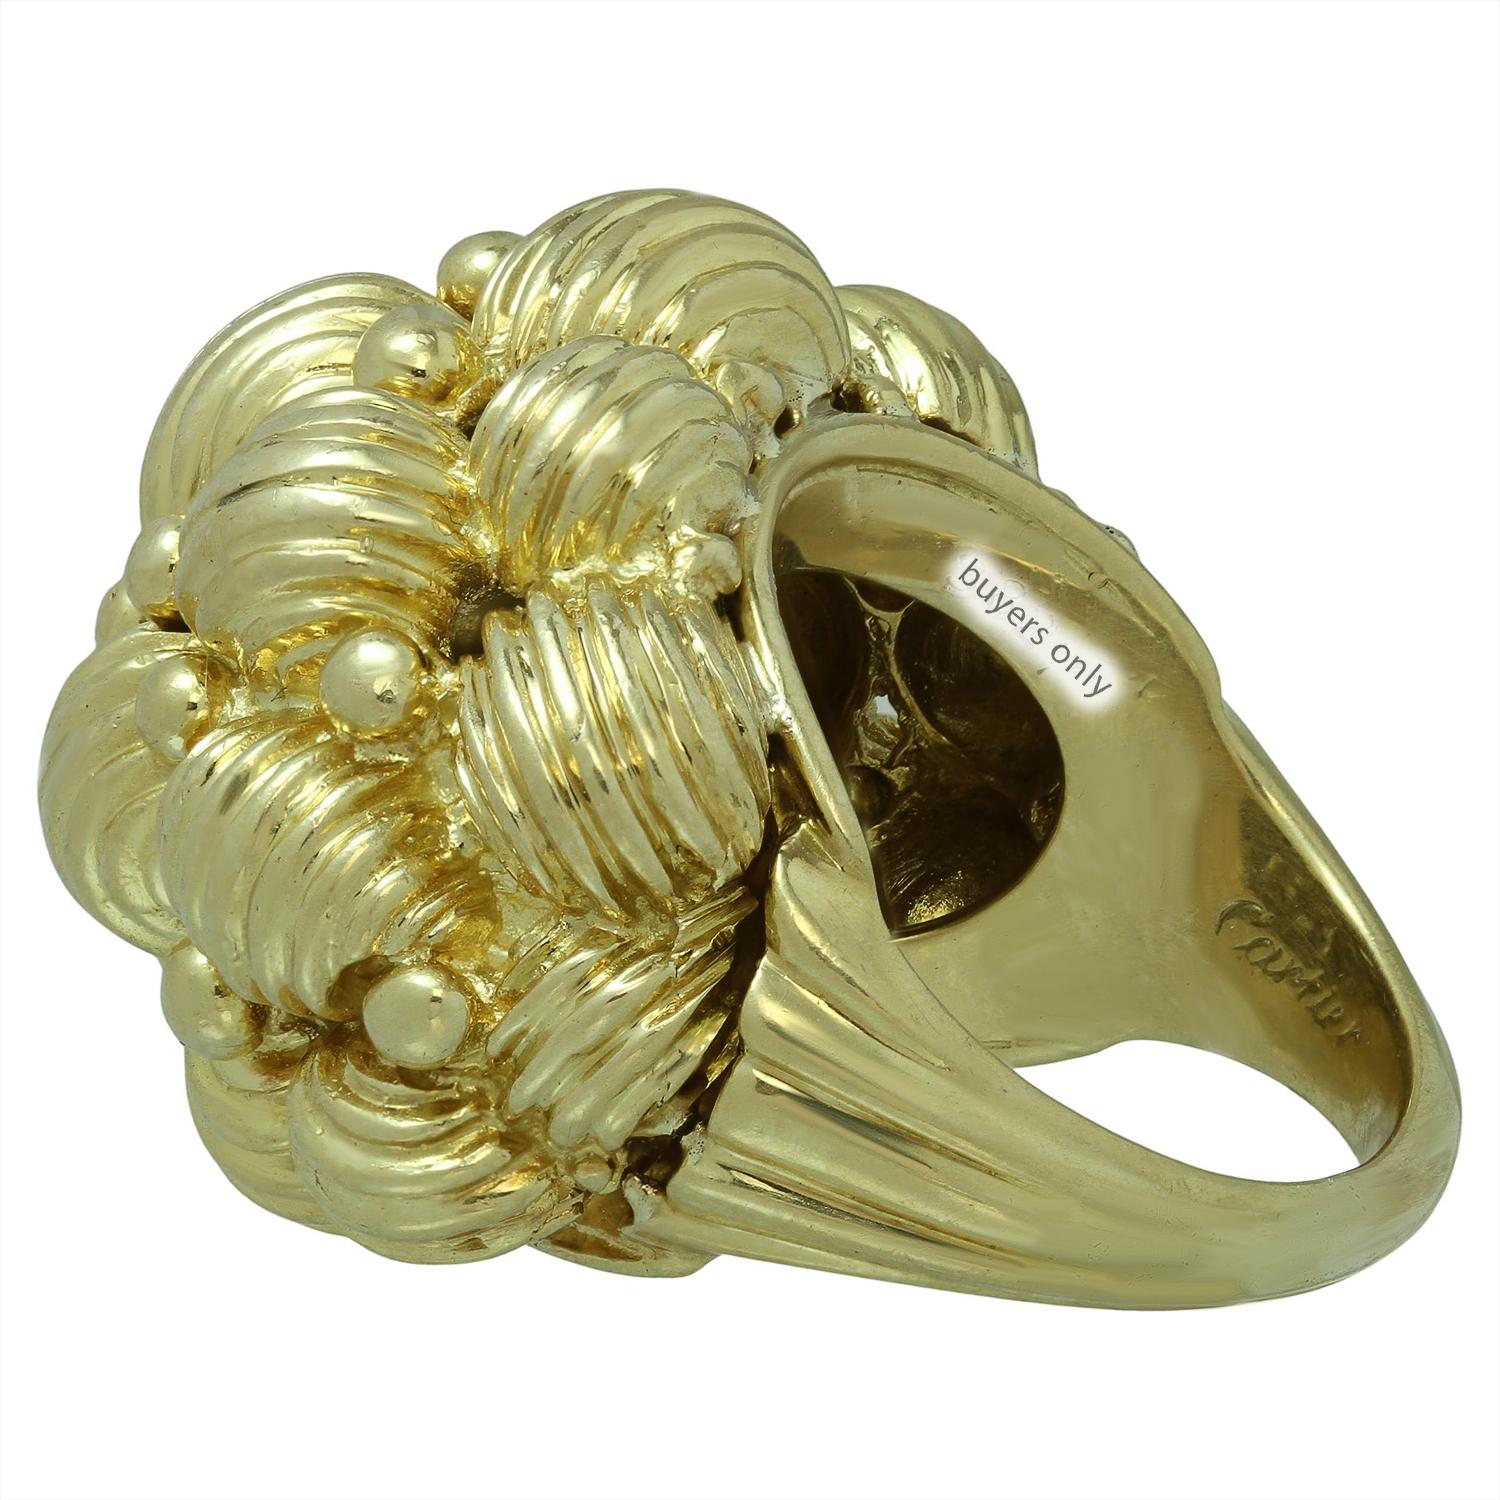 This gorgeous rare vintage Cartier ring is crafted in 18k yellow gold from a 